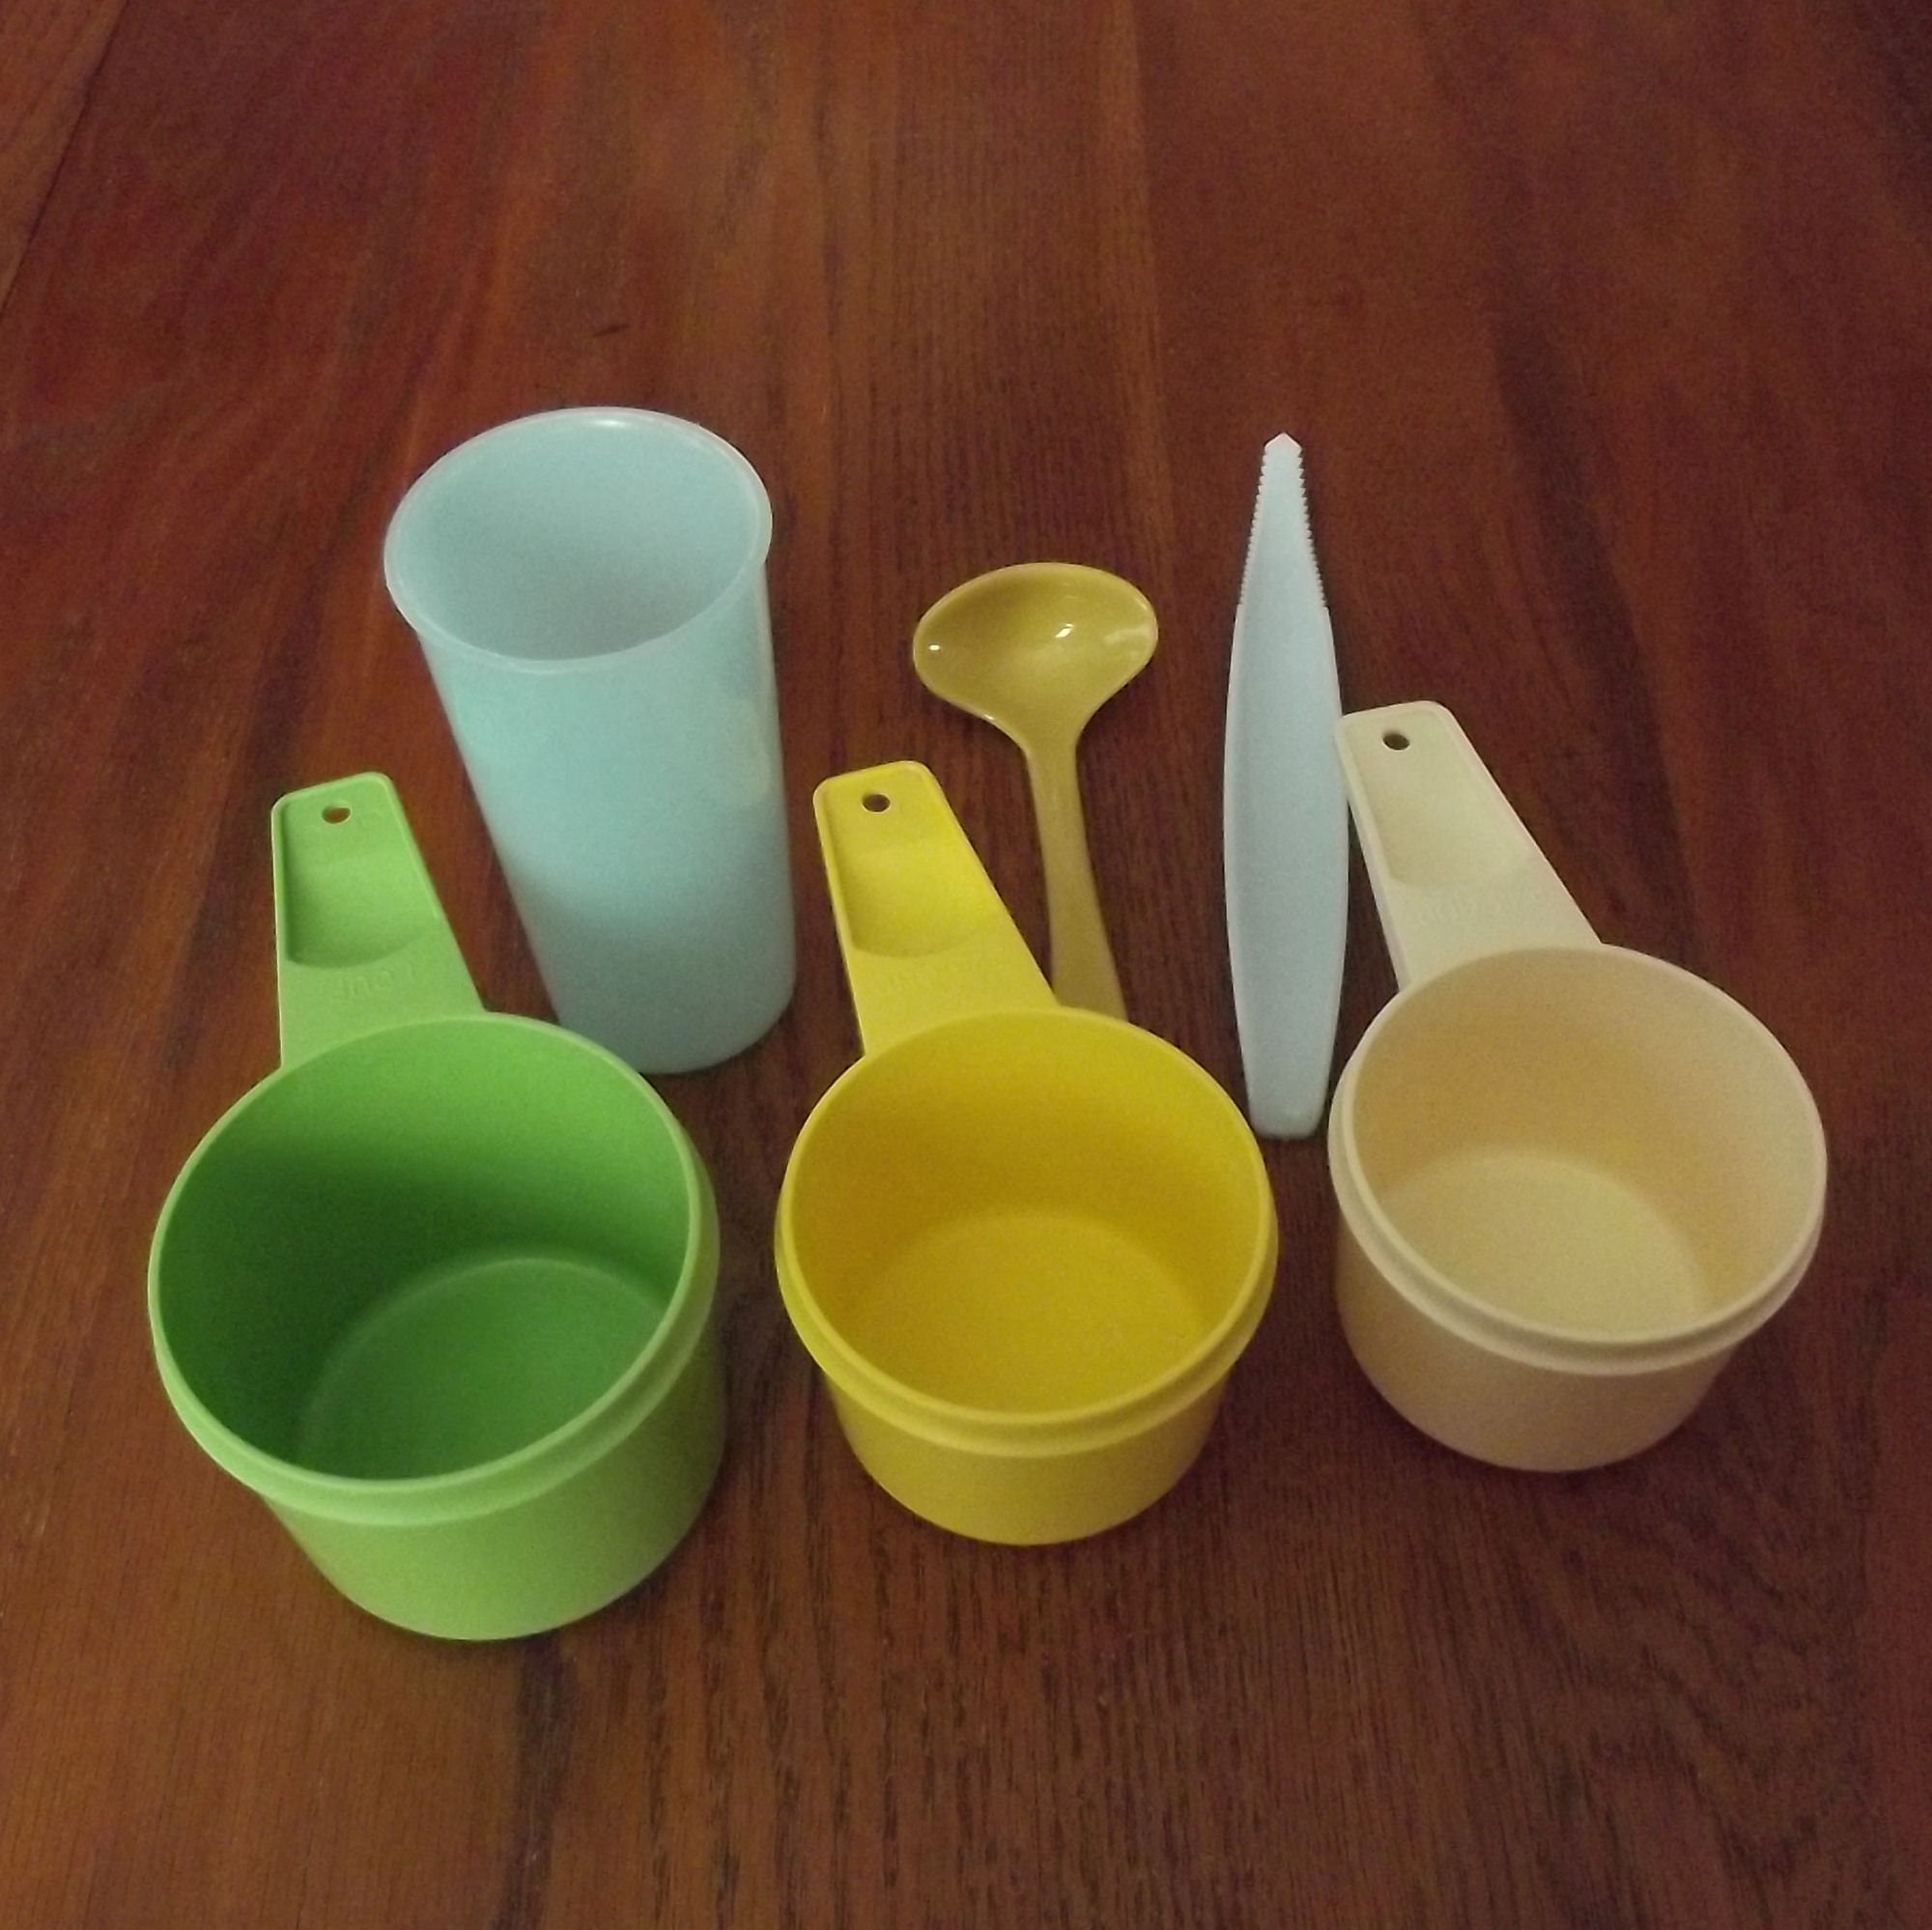 Pampered Chef “Measure All” Slide Measuring Cup Liquid/ Dry Solid Holds 2  Cups